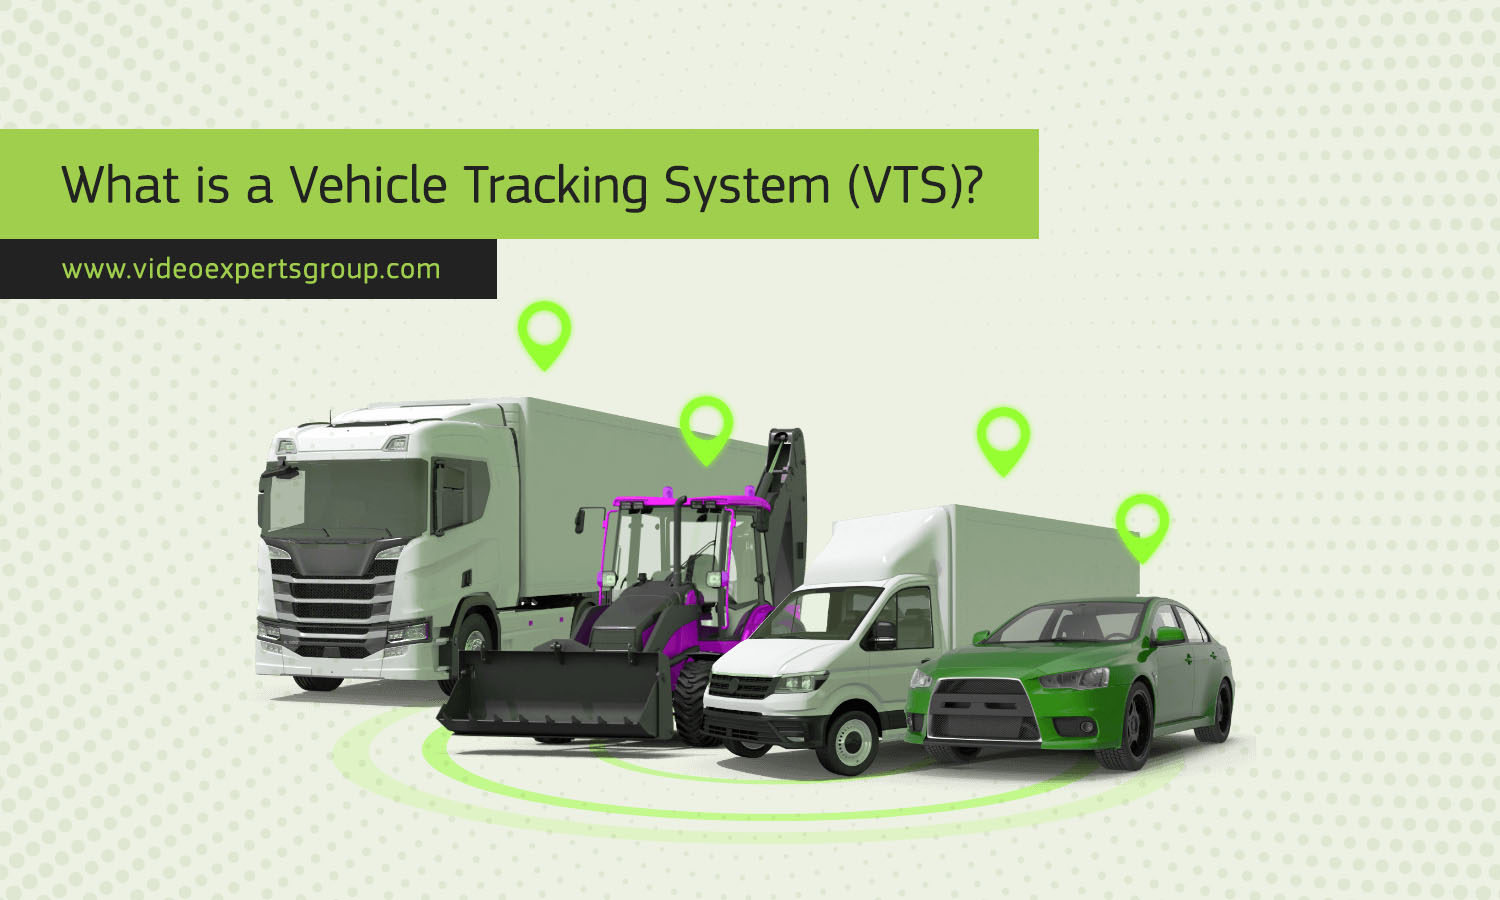 What is a Vehicle Tracking System (VTS)?